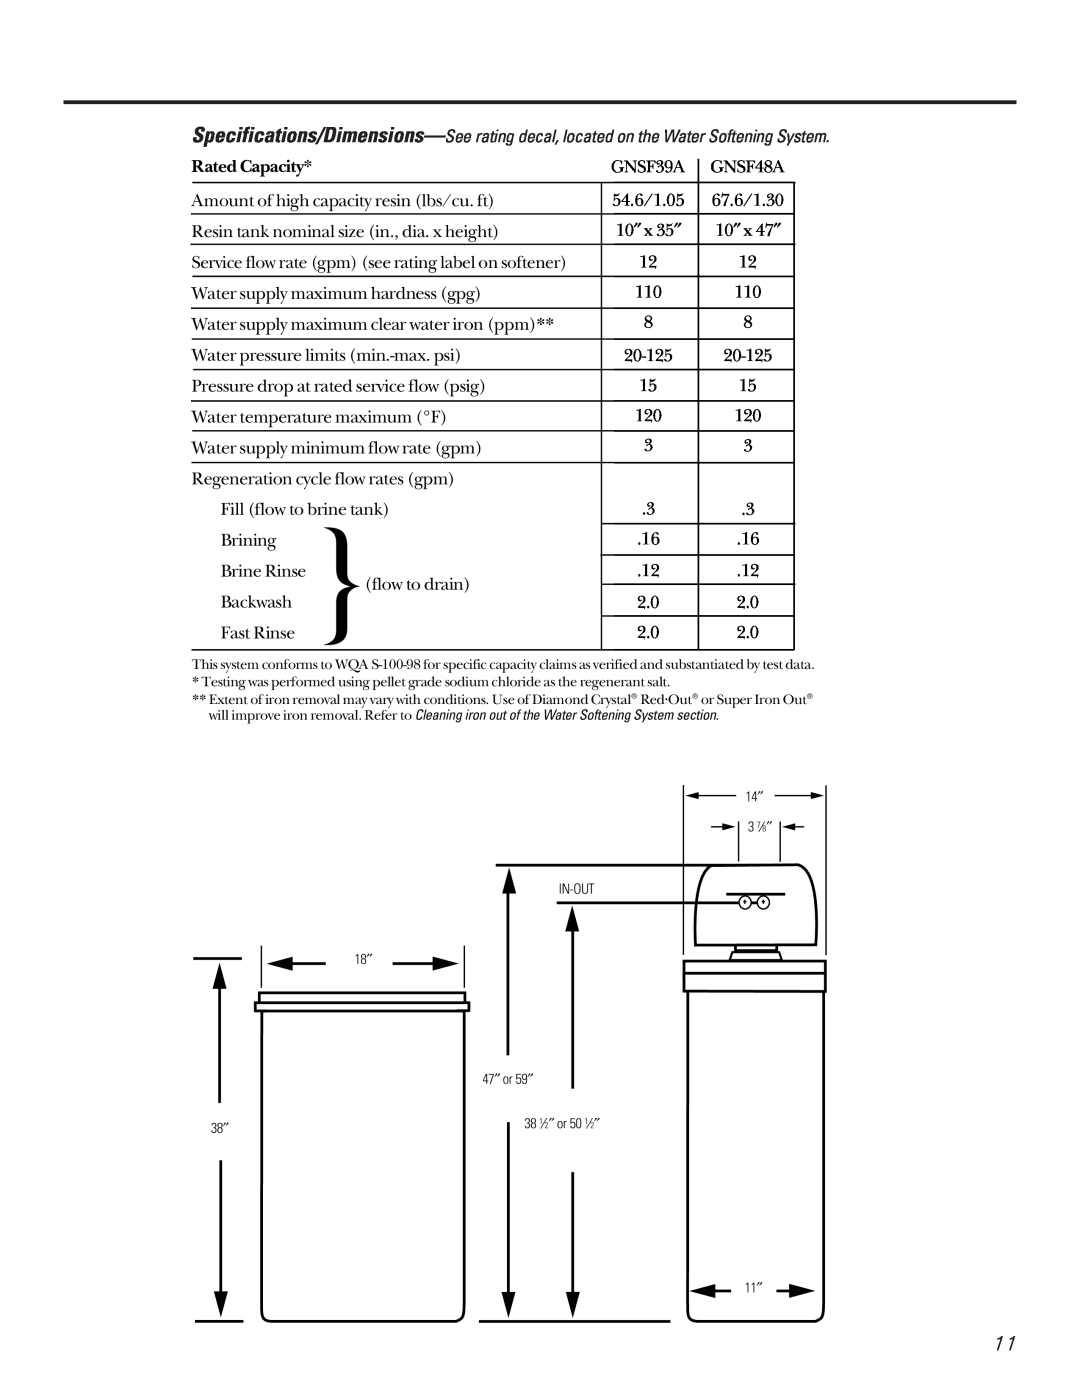 GE GNSF48A01, GNSF39A01 installation instructions 14″ 3 7⁄8″ IN-OUT 18″ 47″ or 59″, 38 1⁄ 2 ″ or 50 1⁄ 2 ″, 38 ″ 